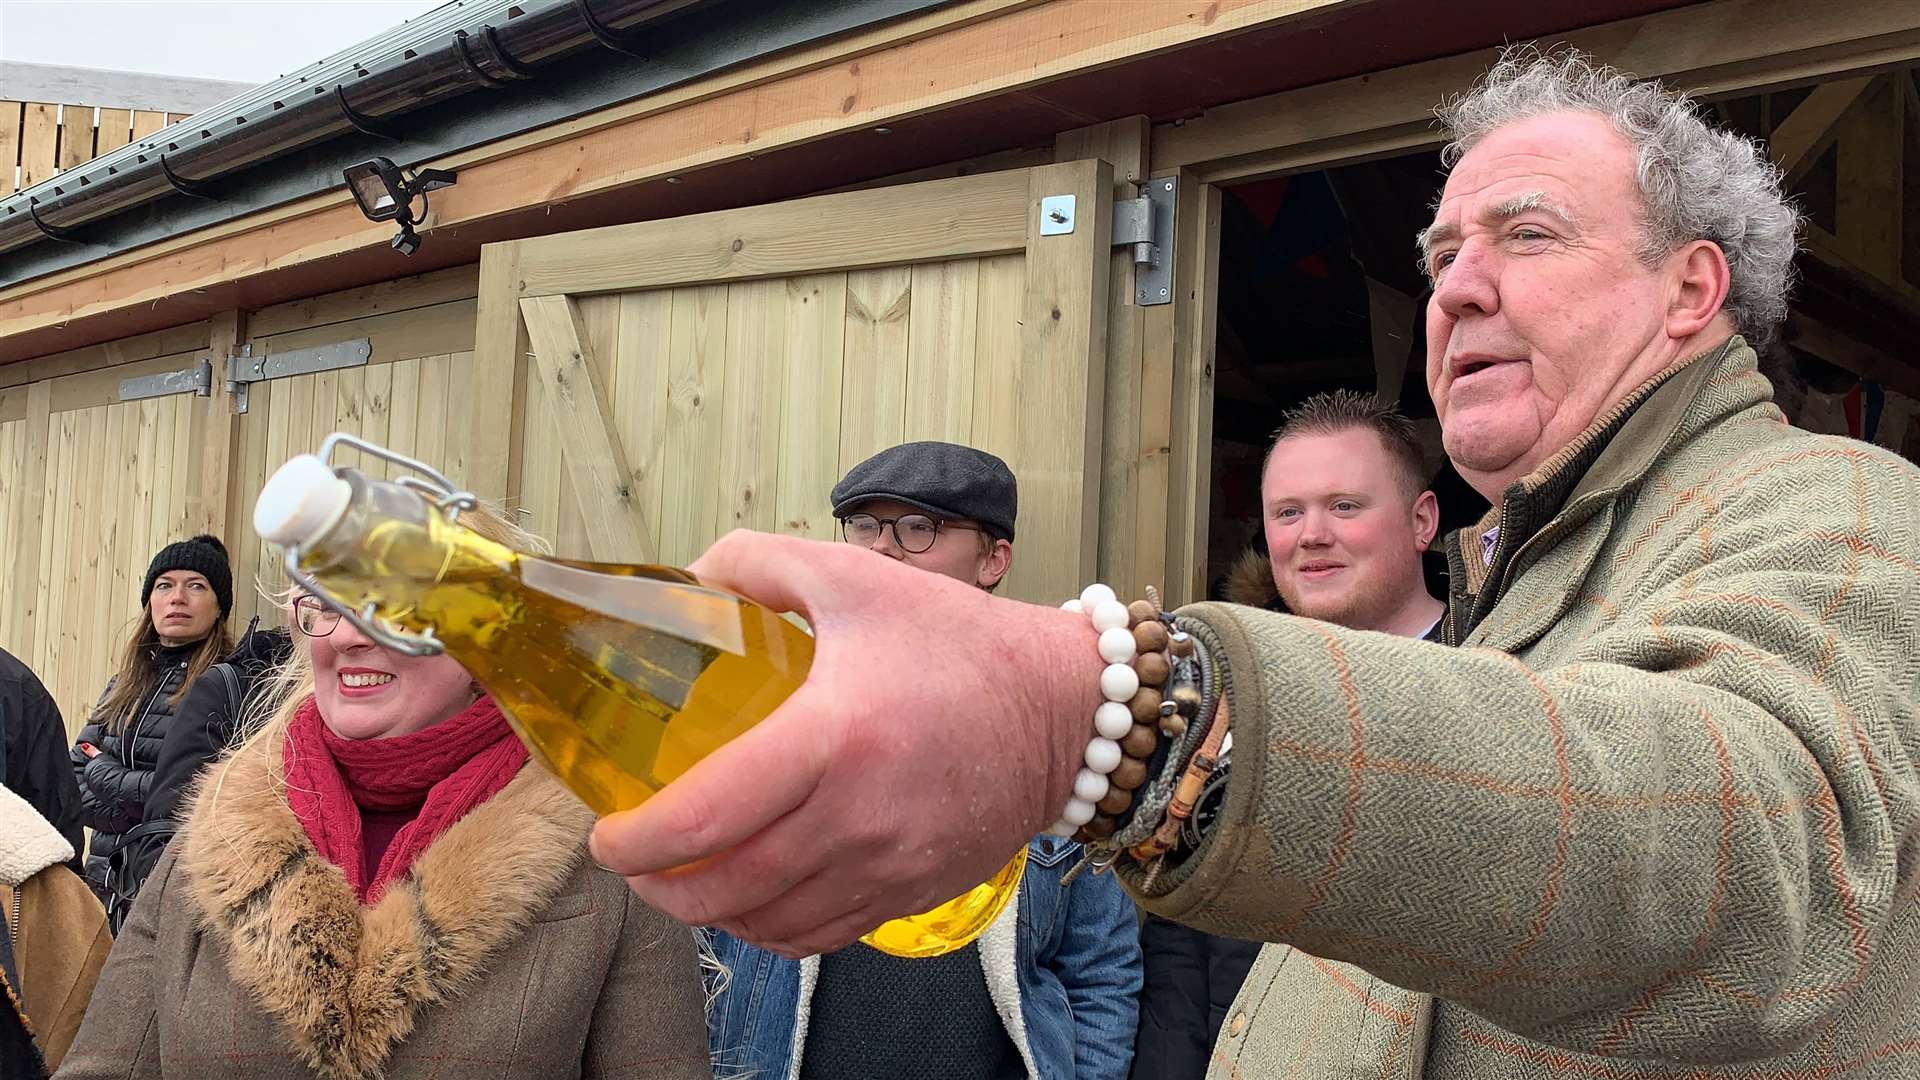 Jeremy Clarkson raffling water outside The Squat Shop, on his farm, Diddly Squat, near Chipping Norton in the Cotswolds which he is running as part of an Amazon Prime show called I Bought A Farm (Blackball Media/PA)